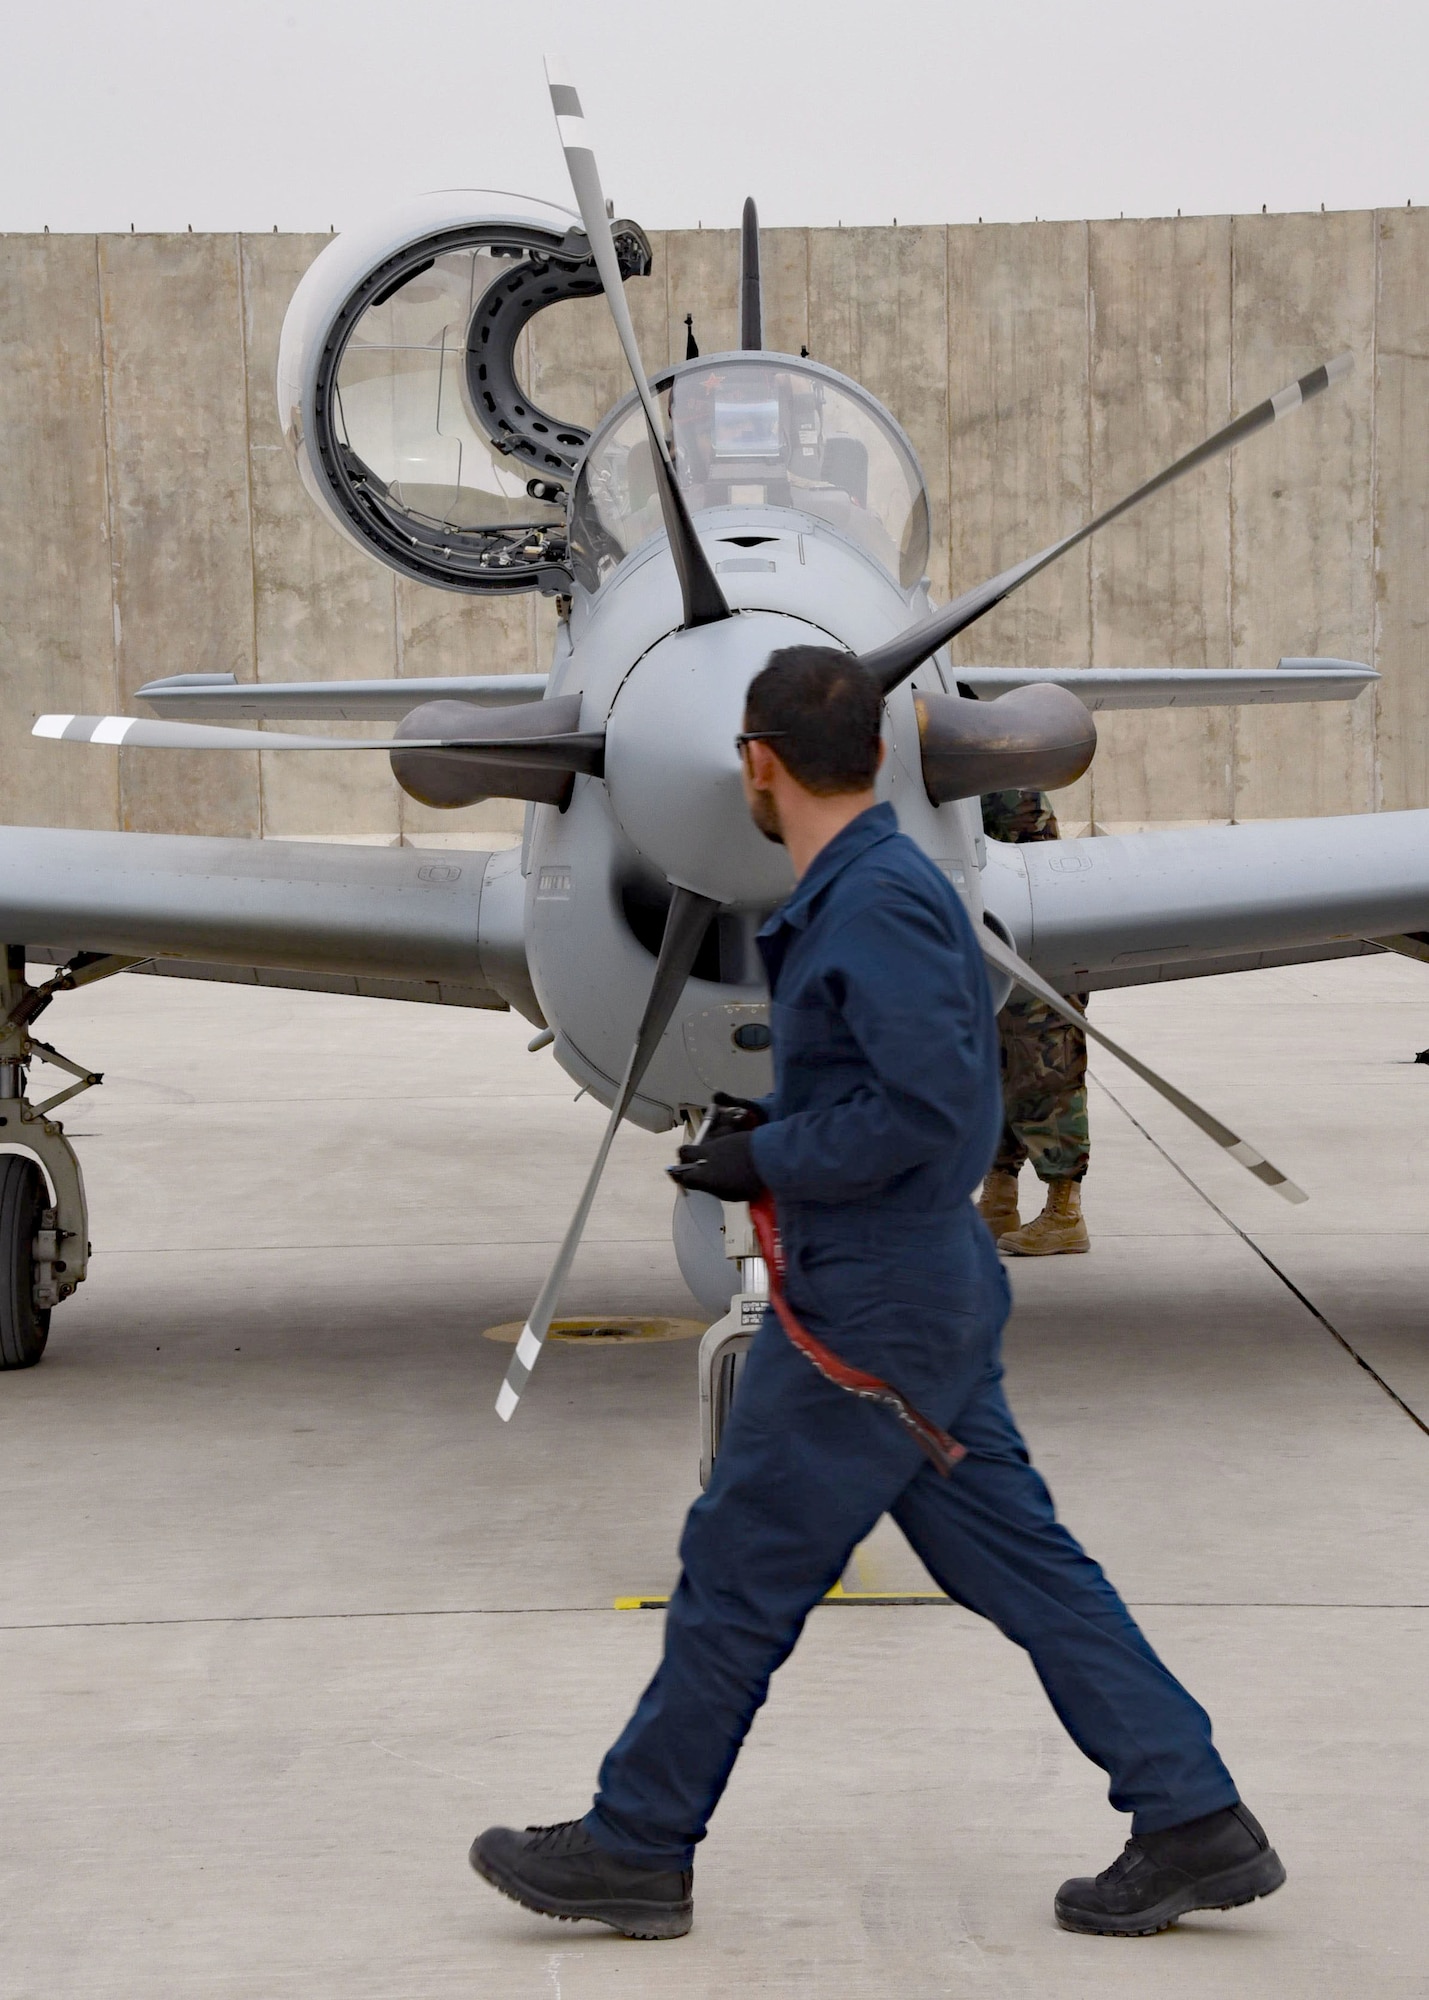 An Afghan Air Force crew chief inspects one of four A-29 Super Tucano light-attack aircraft arriving for duty at Kabul Air Wing, Kabul, Afghanistan, March 20, 2017. The A-29s will be used by the Afghan Air Force for close-air attack, air interdiction, escort and armed reconnaissance. These latest arrivals, which traveled from Moody Air Force Base, Ga., bring the AAF A-29 inventory from eight to 12 aircraft in country. (U.S. Air Force photo by Tech. Sgt. Veronica Pierce)